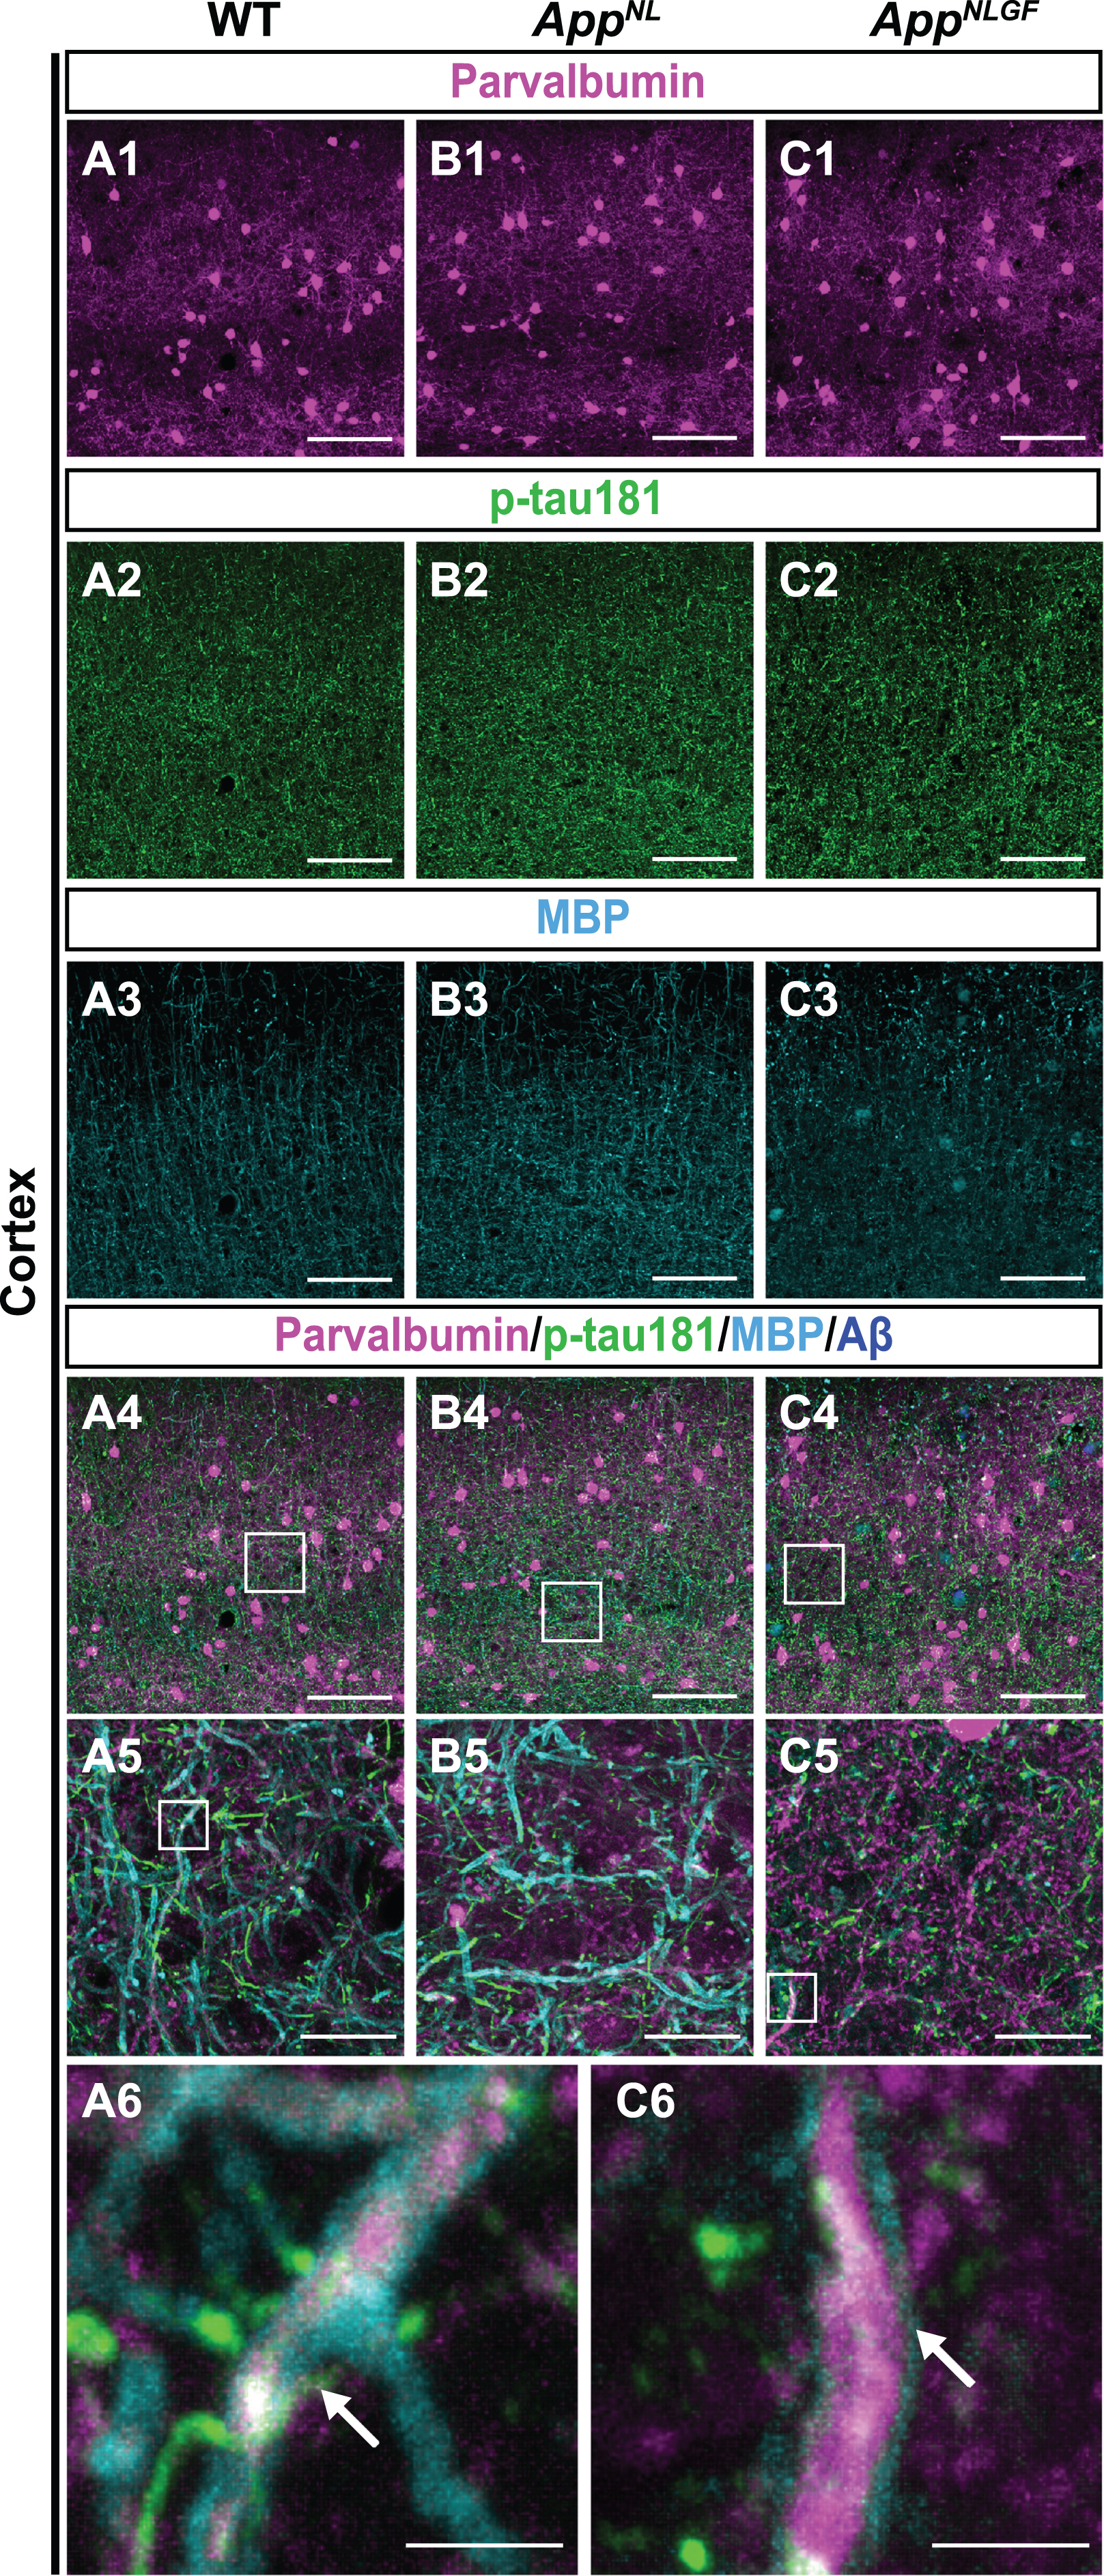 p-tau181-positive axons overlap with parvalbumin-expressing axons in mouse brains. (A1– C4) Representative images of the cortex from frozen coronal brain sections immunostained with antibodies against parvalbumin (magenta), p-tau181 (green), and MBP (cyan). FSB was used for detecting Aβ plaques (blue). Scale bars, 100μm. (A5– C5) Higher magnification of framed regions indicated in A4– C4. Scale bars, 20μm. (A6, C6) Higher magnification of framed regions indicated in A5 and C5. White arrows indicate MBP signals enwrapped with the p-tau181-positive axons of parvalbumin-expressing interneurons. Scale bars, 2.5μm.